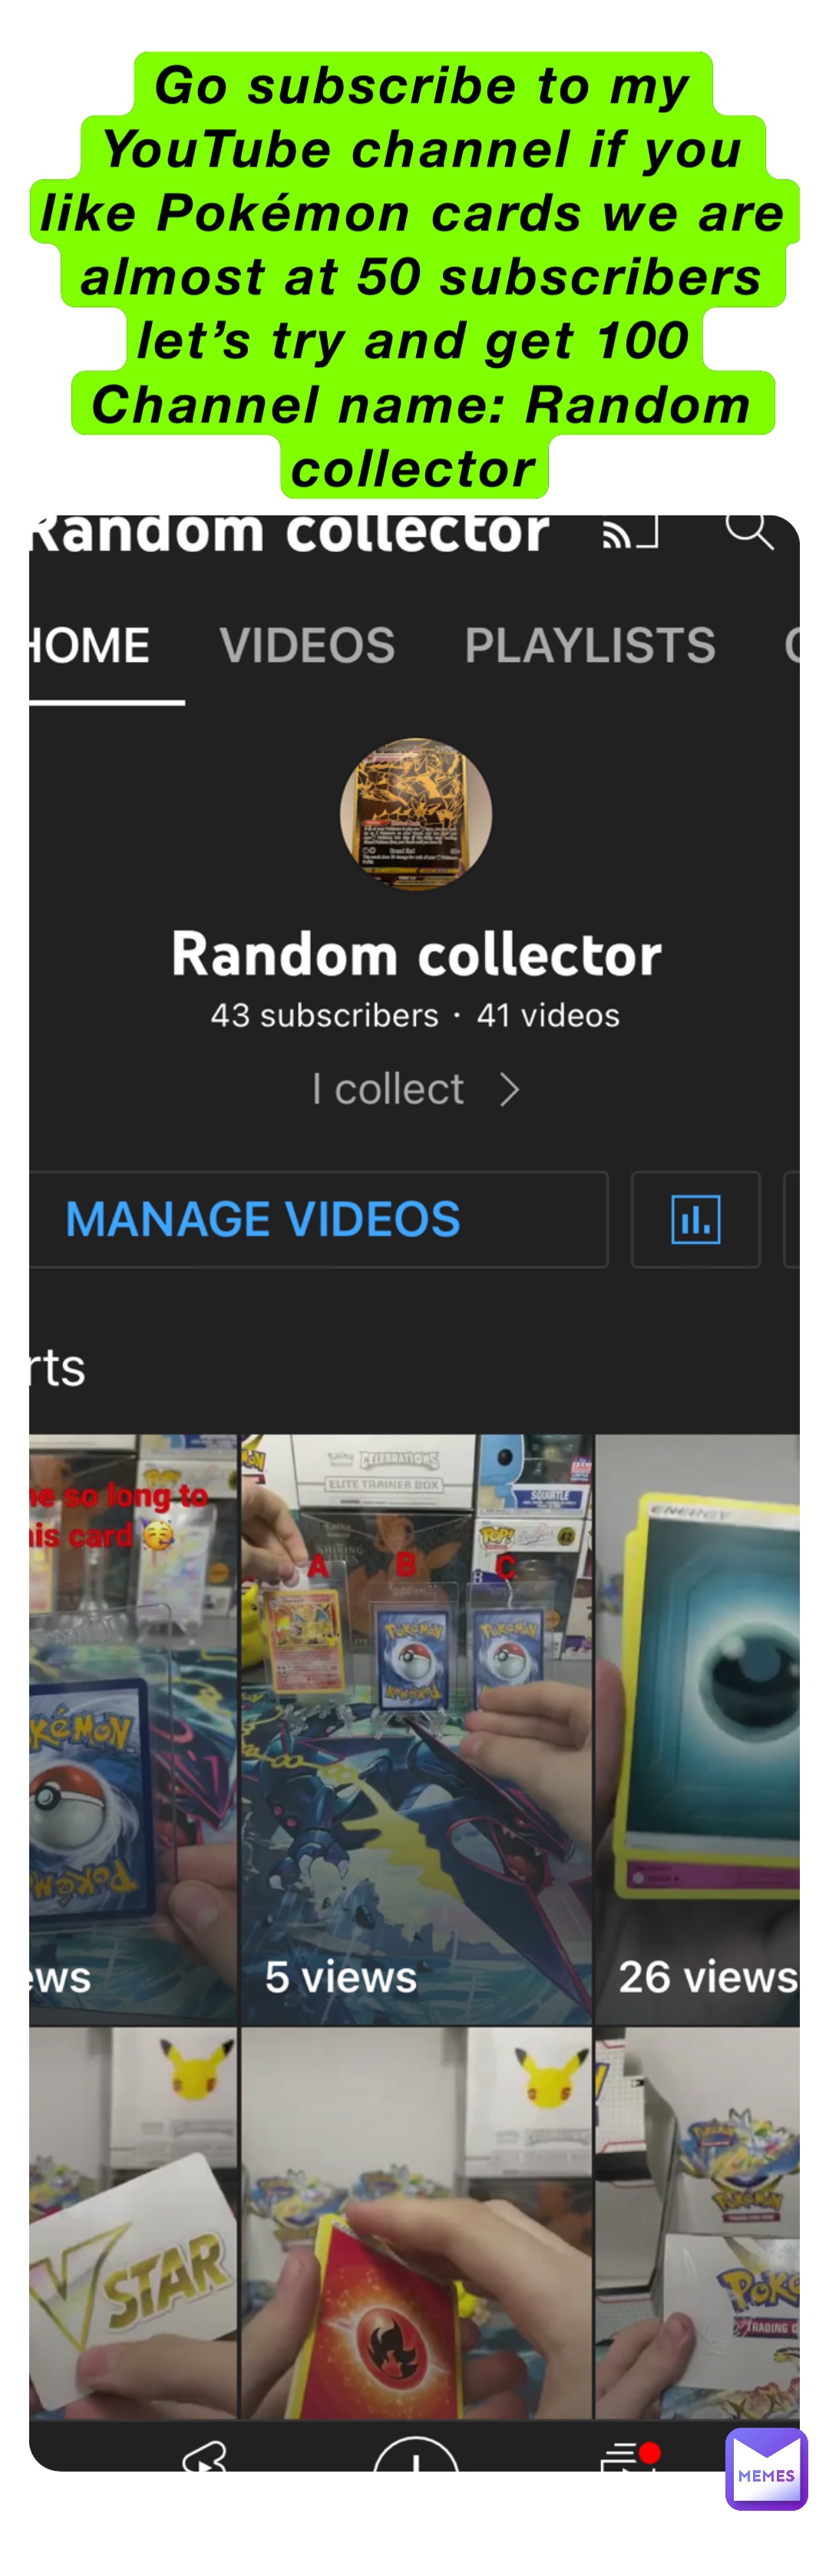 Go subscribe to my YouTube channel if you like Pokémon cards we are almost at 50 subscribers let’s try and get 100
Channel name: Random collector